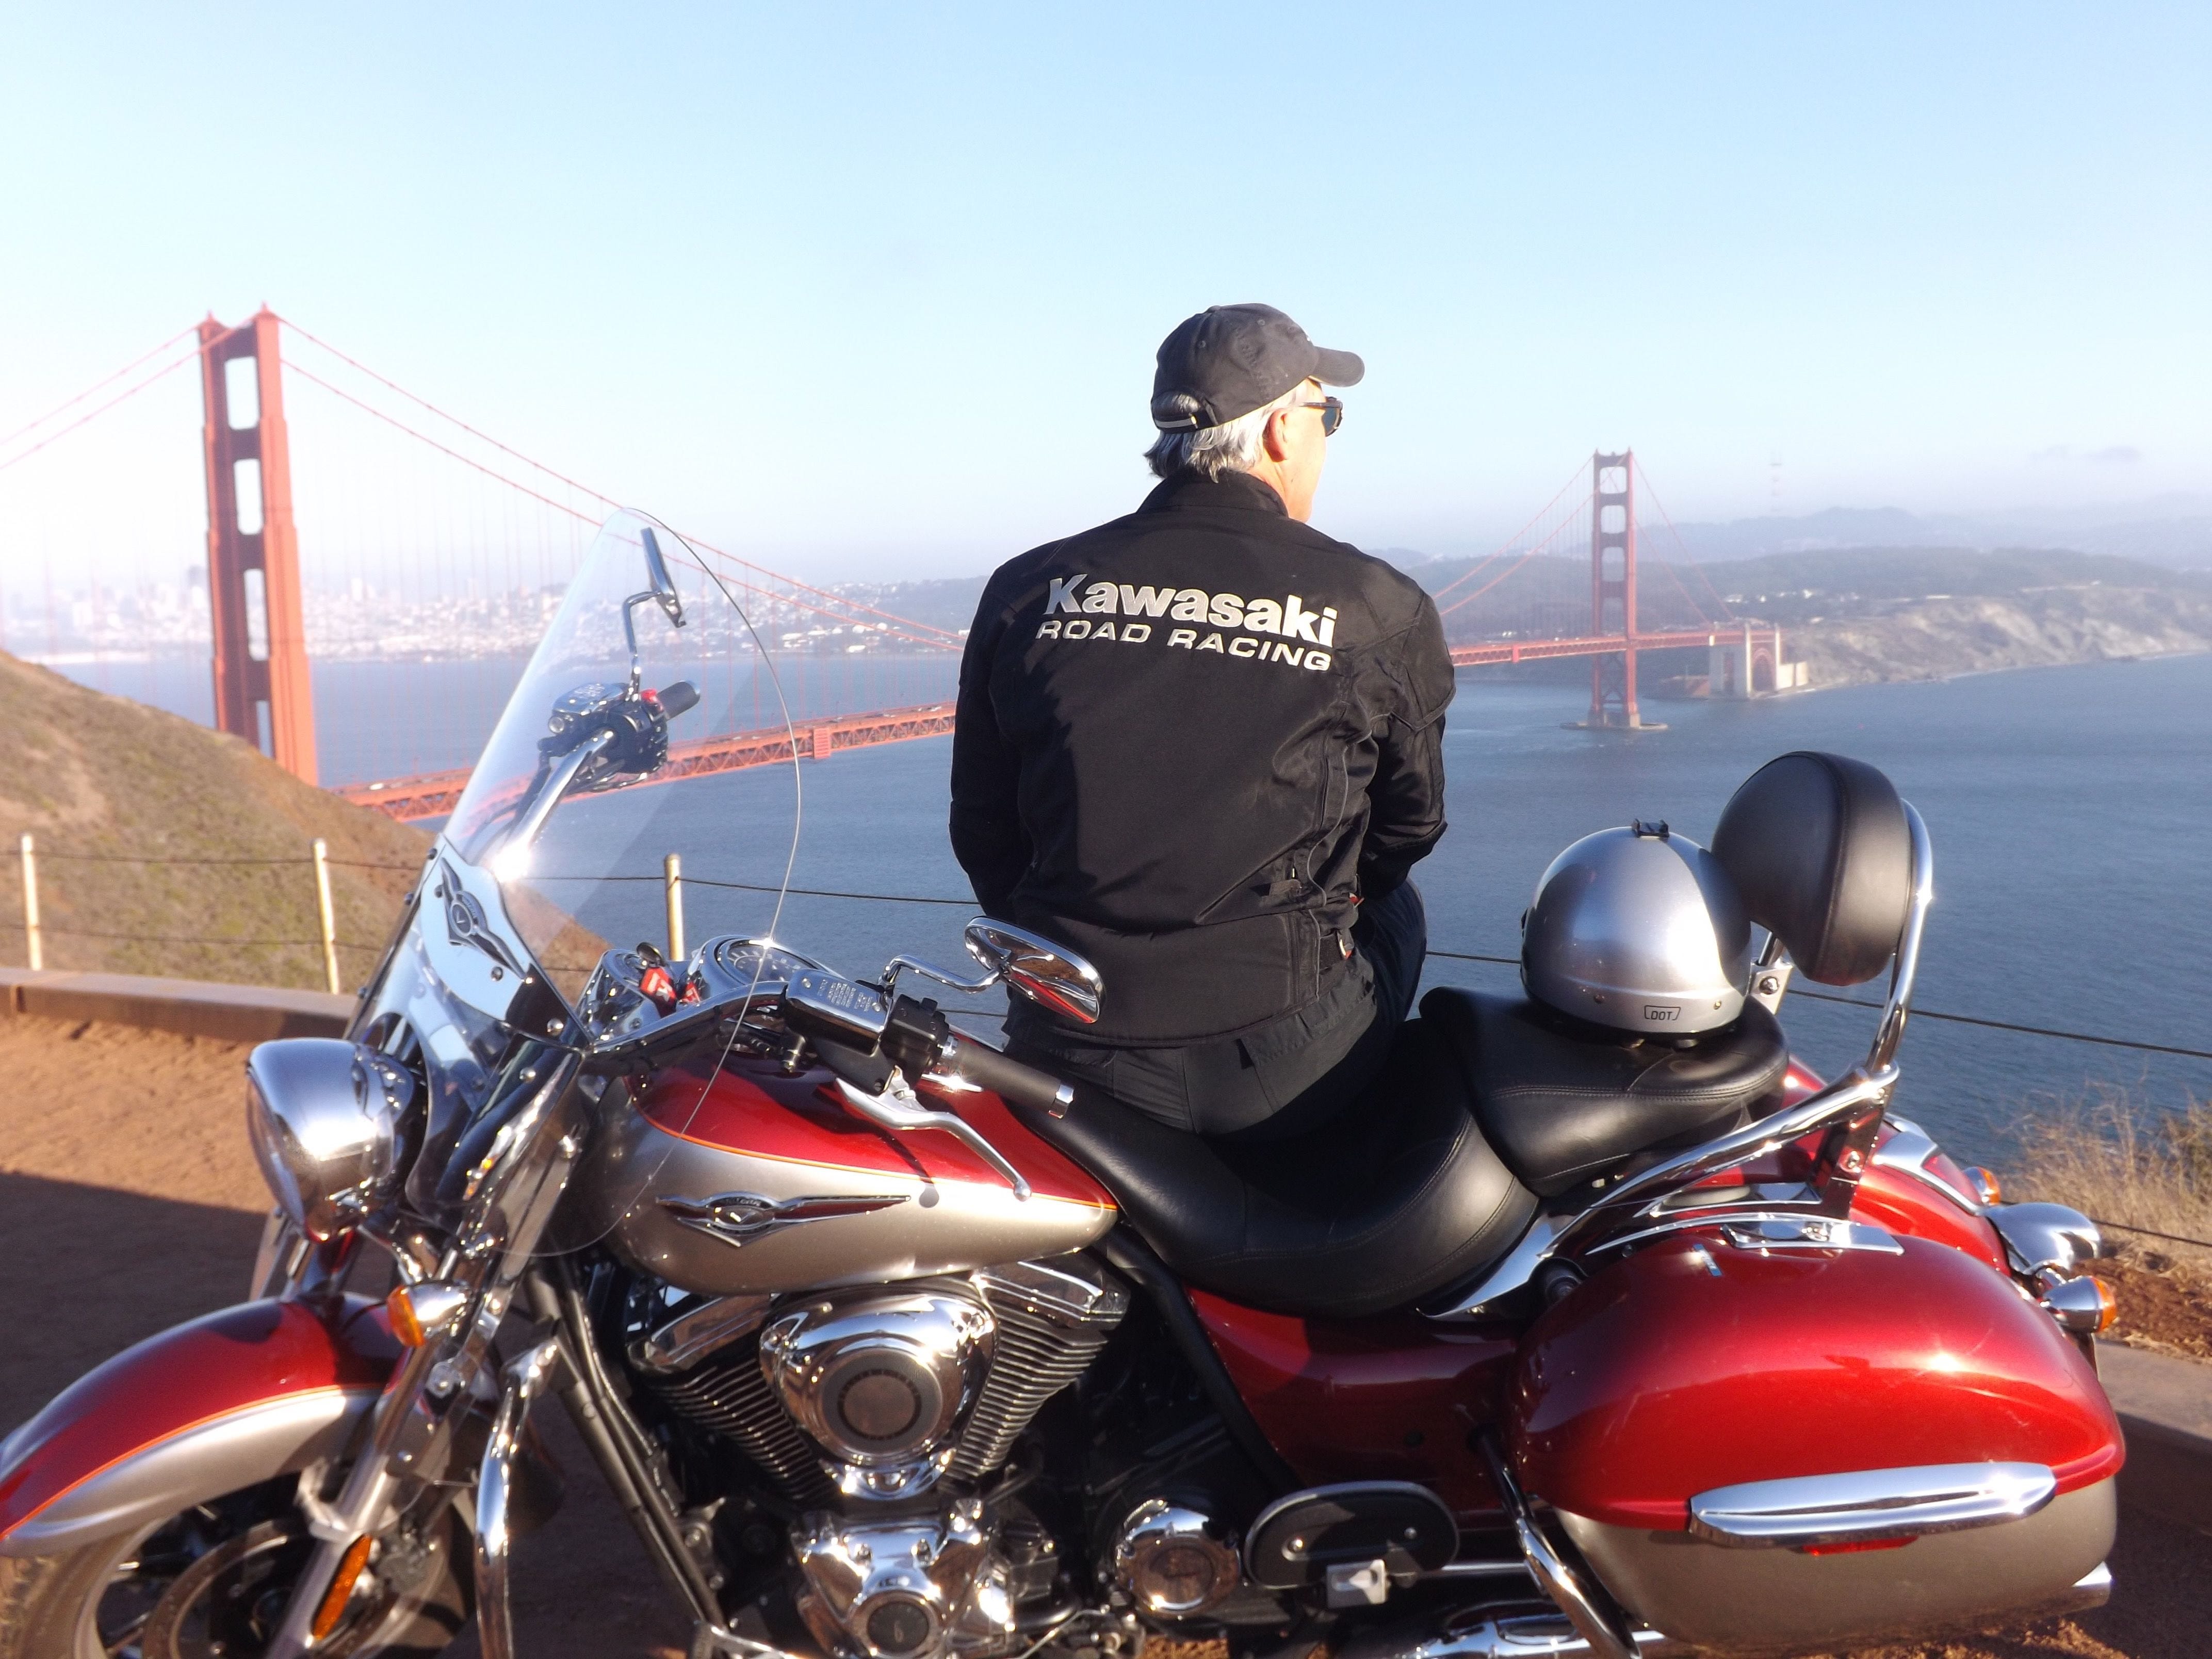 Five things to love about a motorcycle vacation